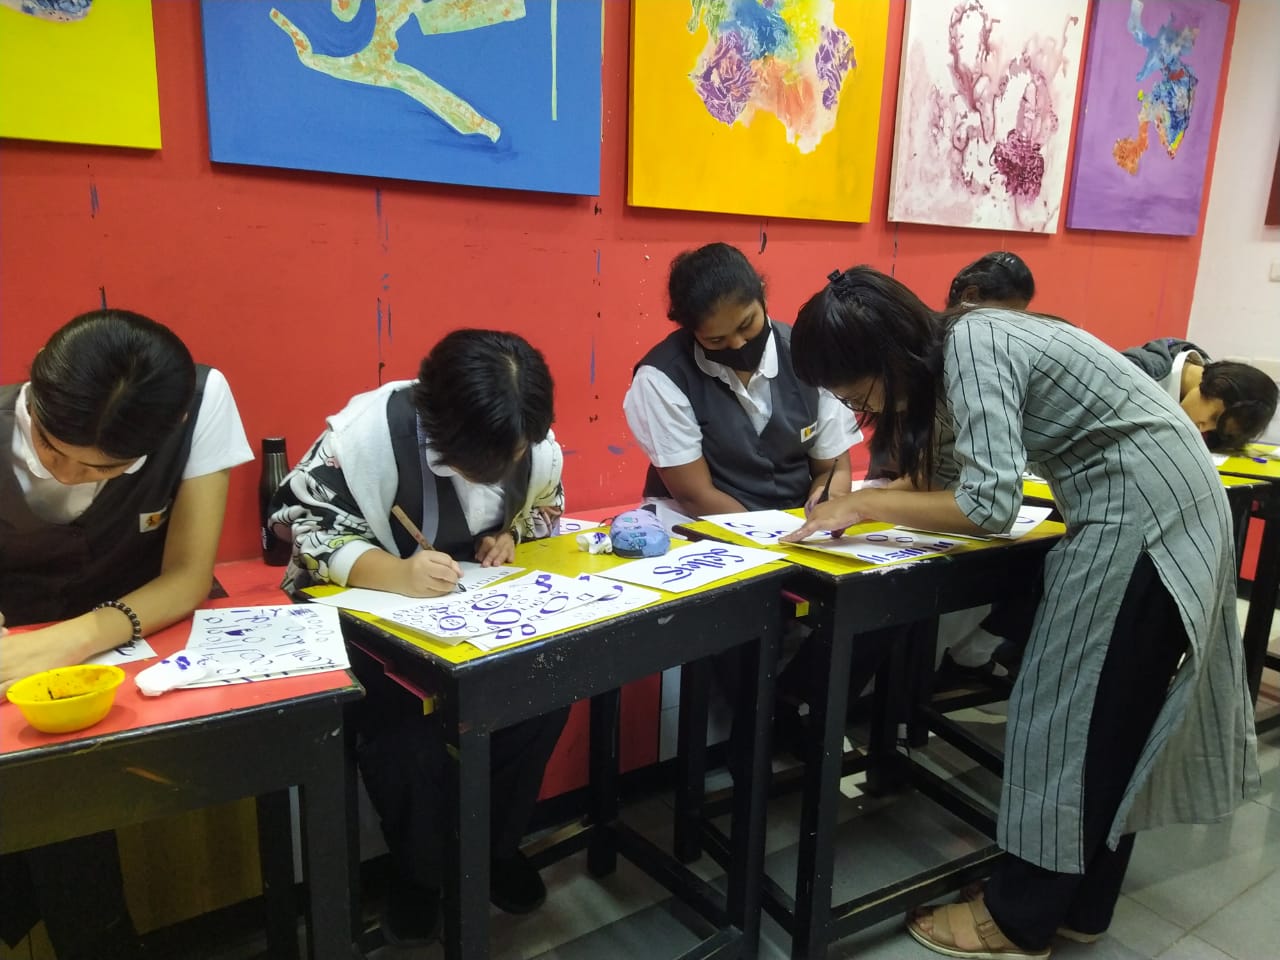 acrylic painting classes in chennai